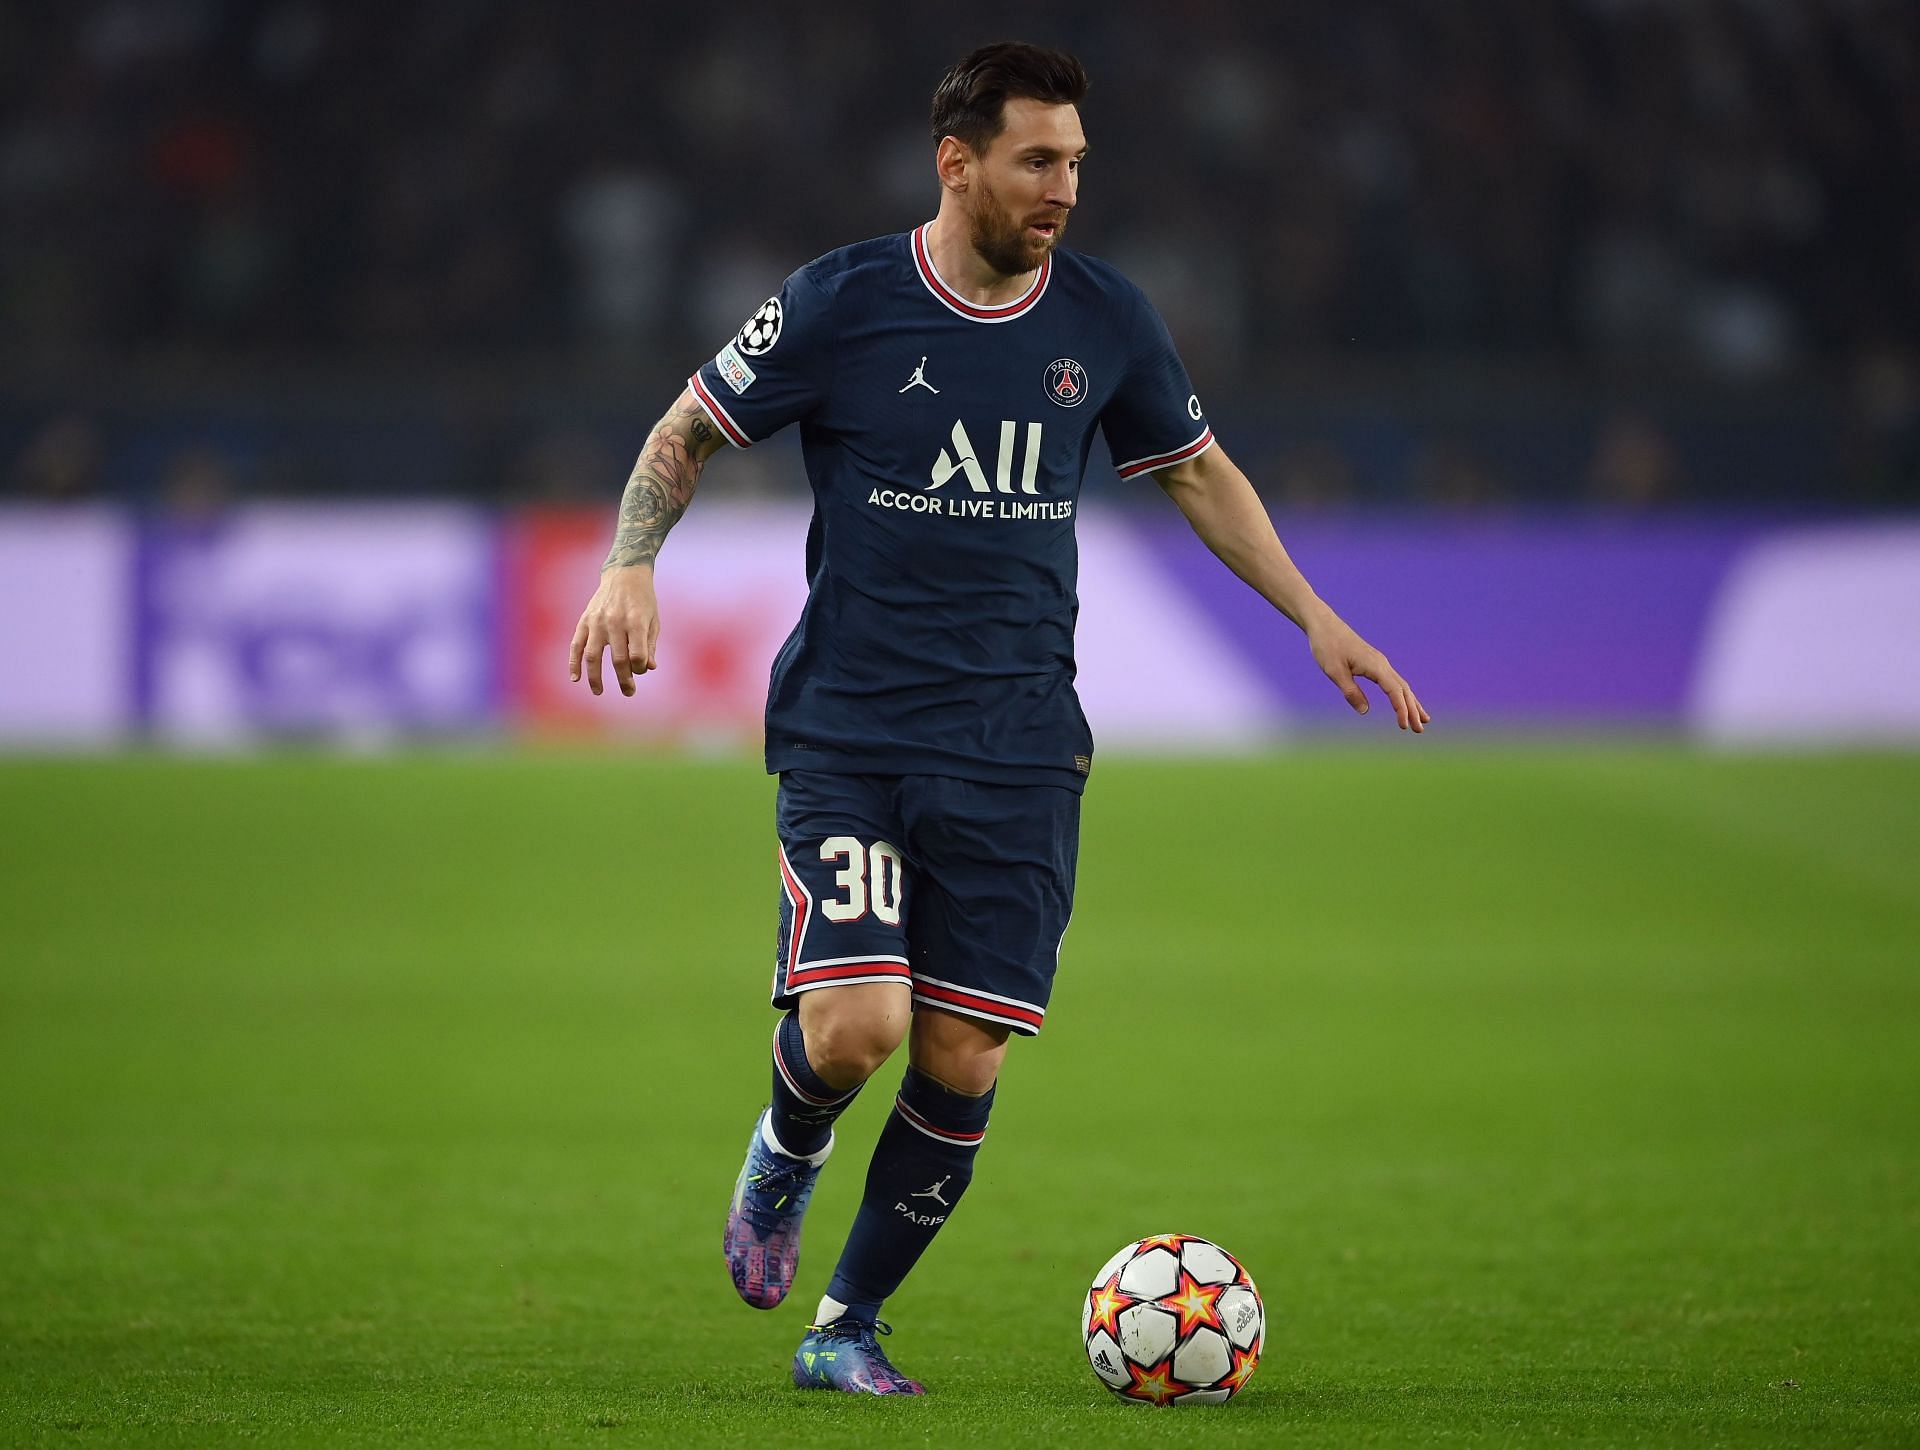 Lionel Messi has made a subdued start to life at PSG.